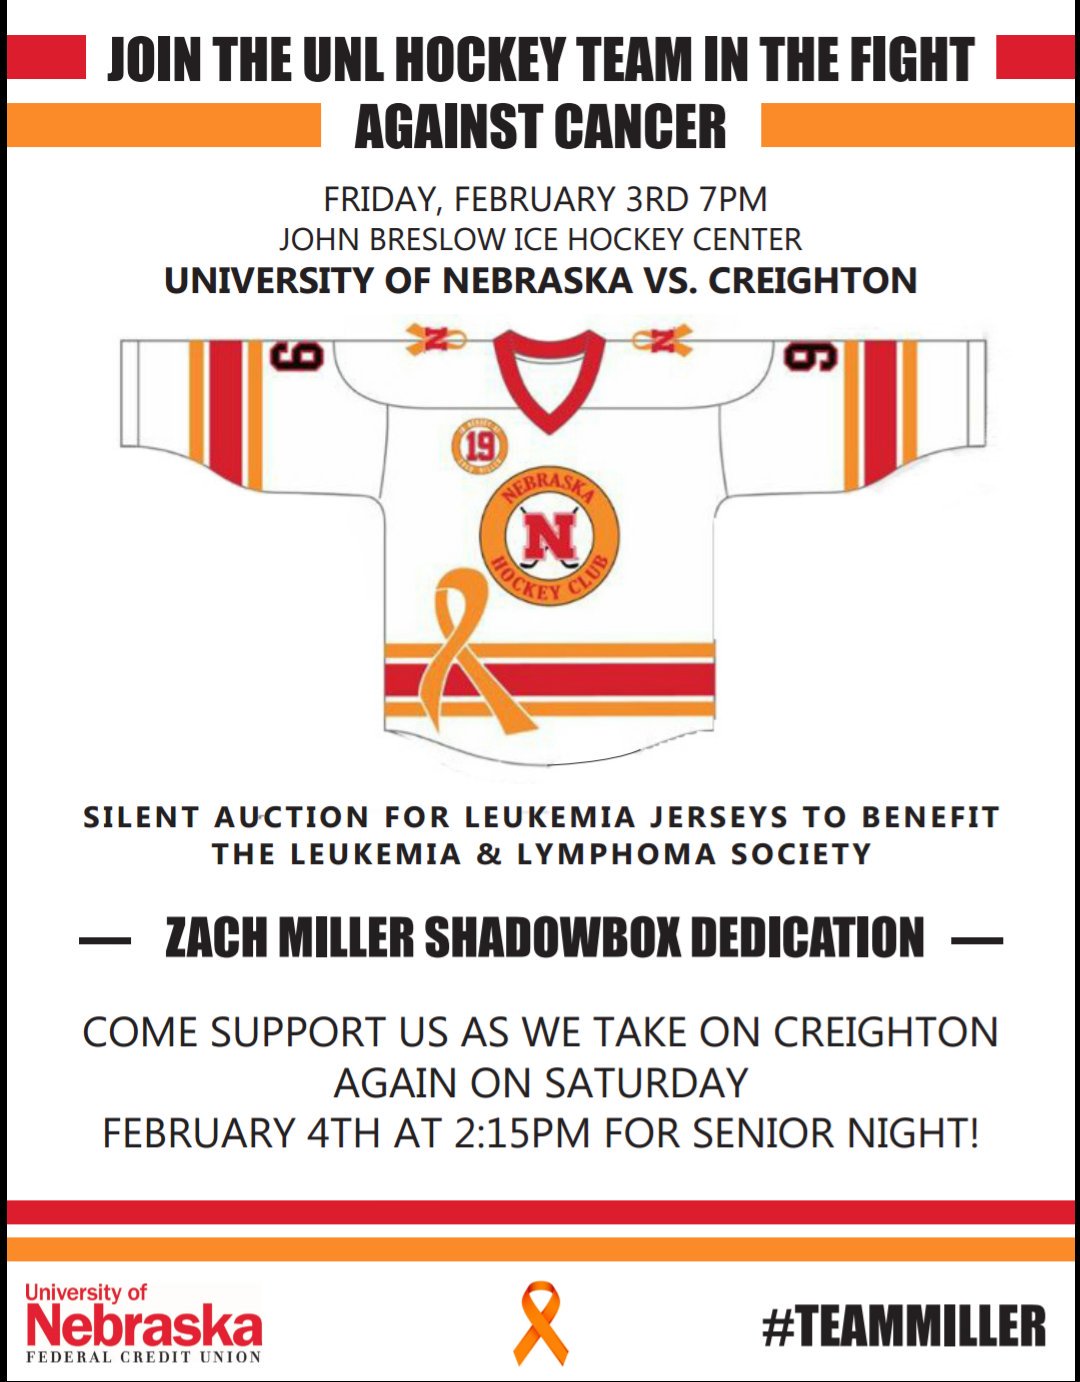 Support the hockey team this weekend.